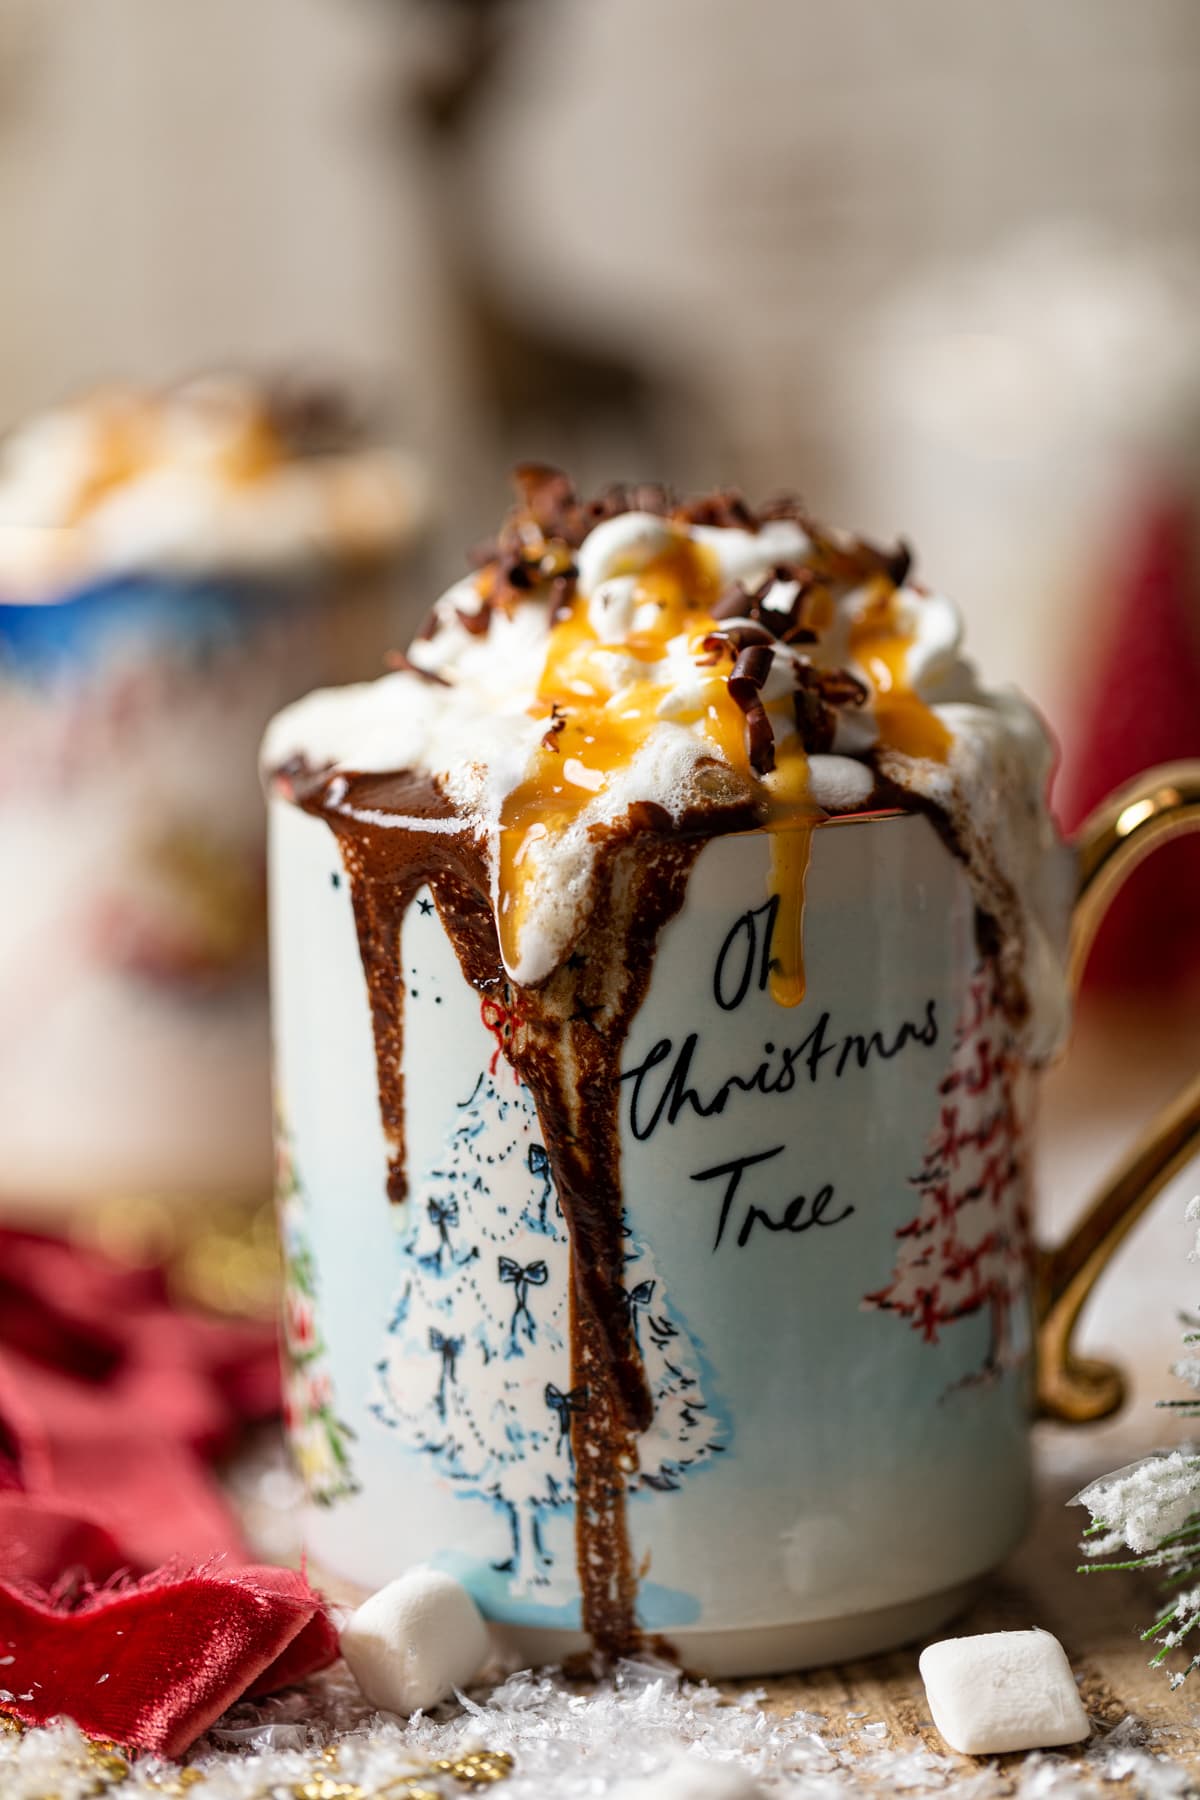 Creamy Caramel Hot Chocolate topped with coconut whipped cream, chocolate shavings, and caramel sauce